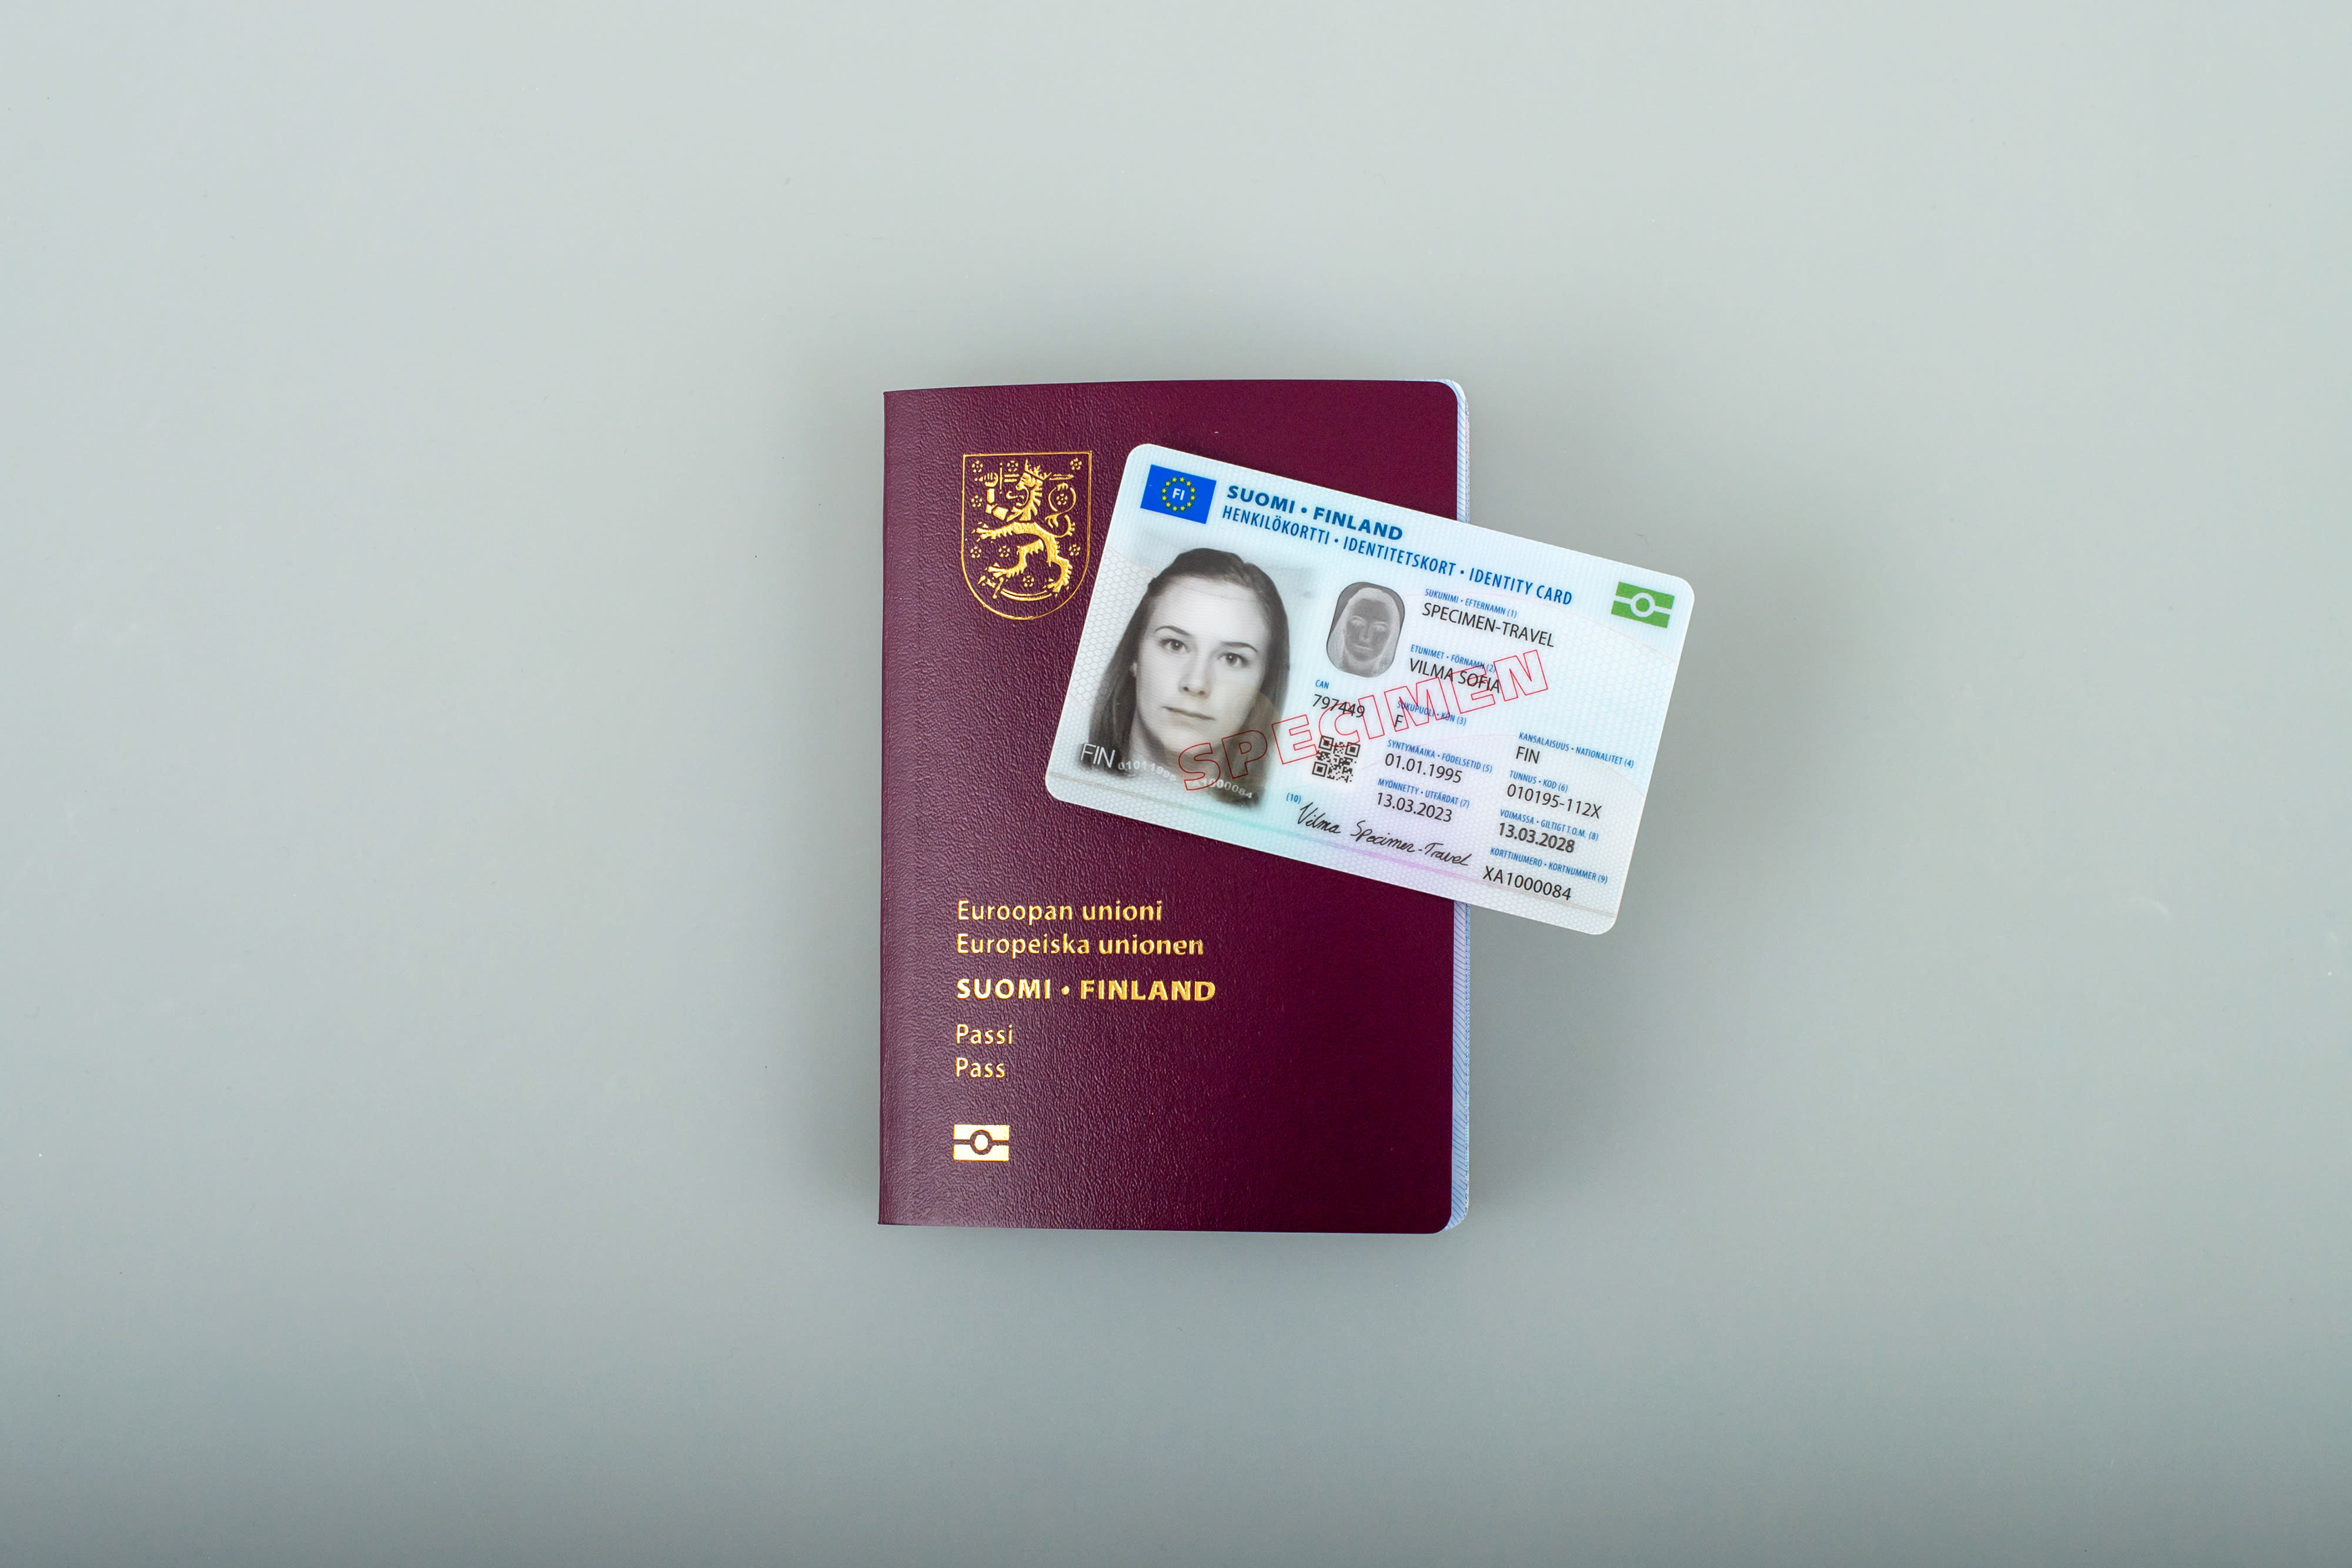 Finnish passports for planning, security reform this spring